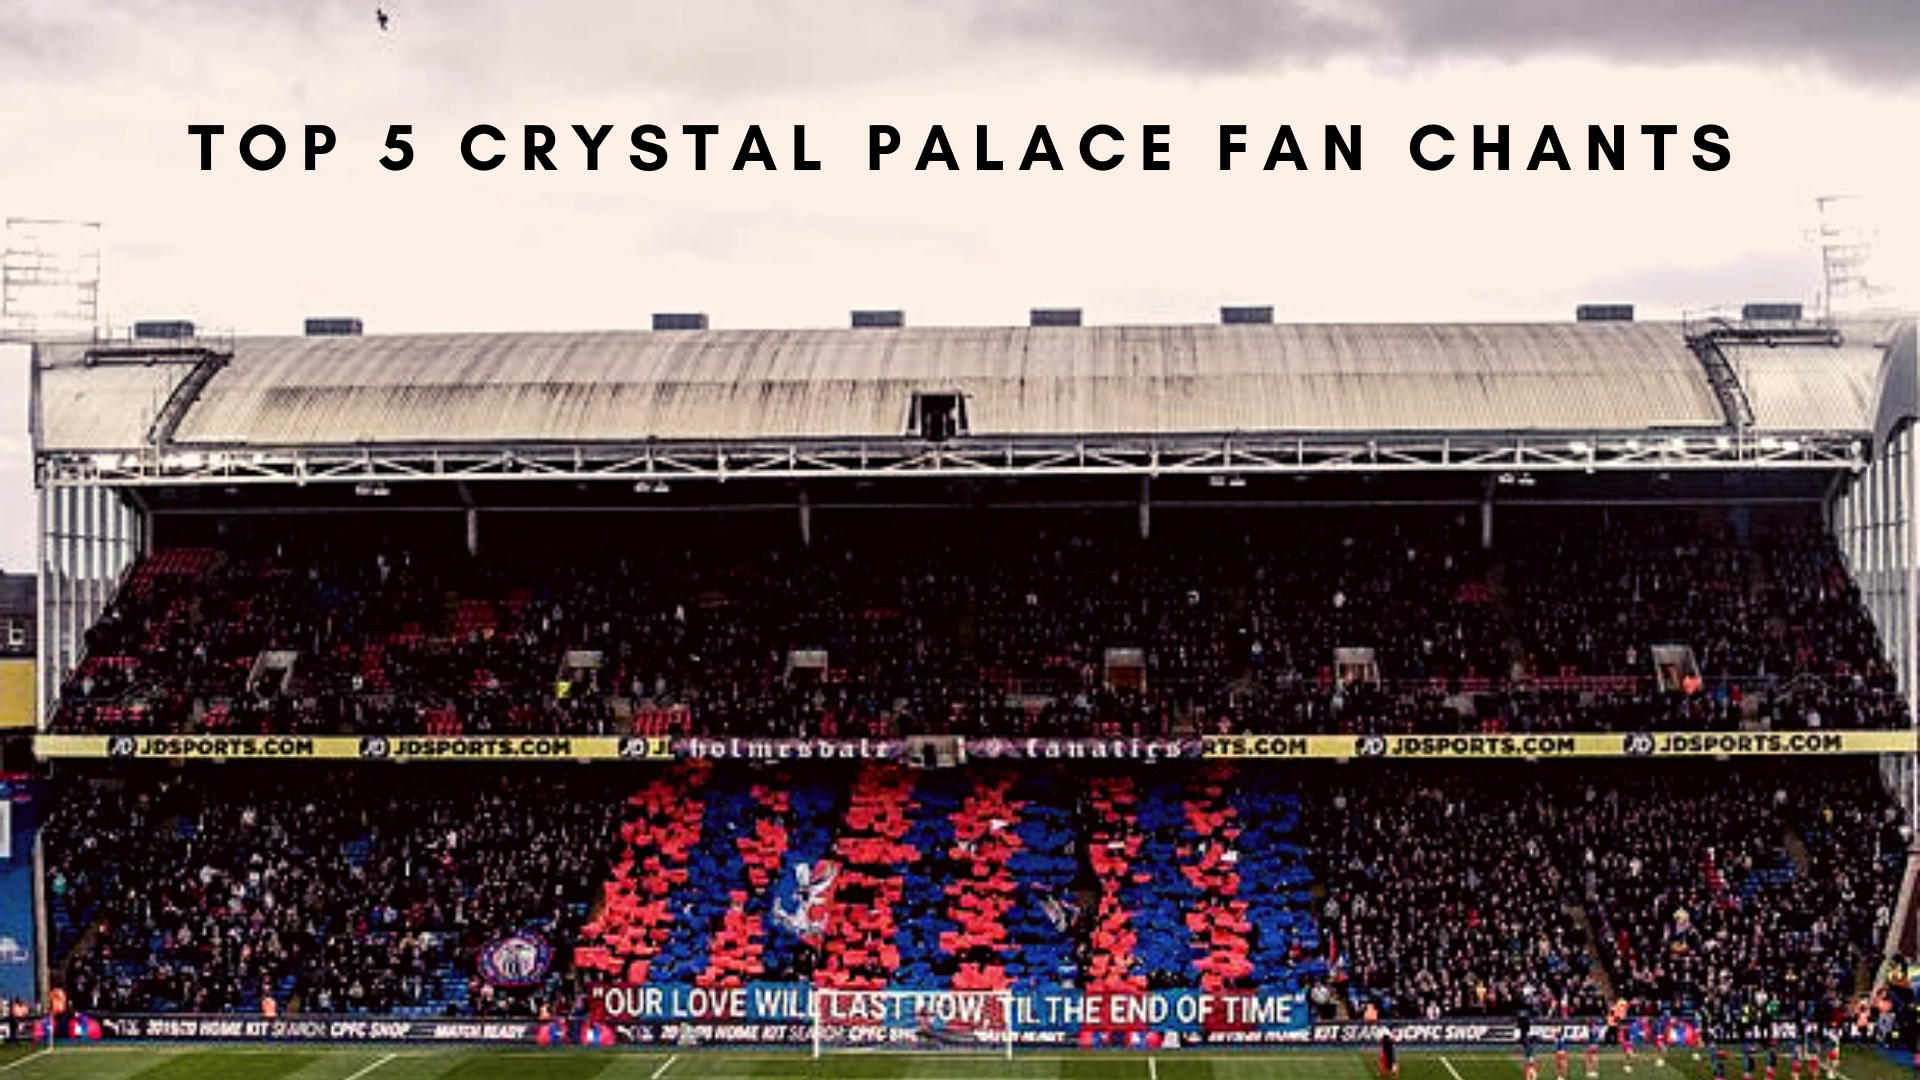 Here is the list of top 5 Crystal Palace fan chants. (Credit: Getty Images)